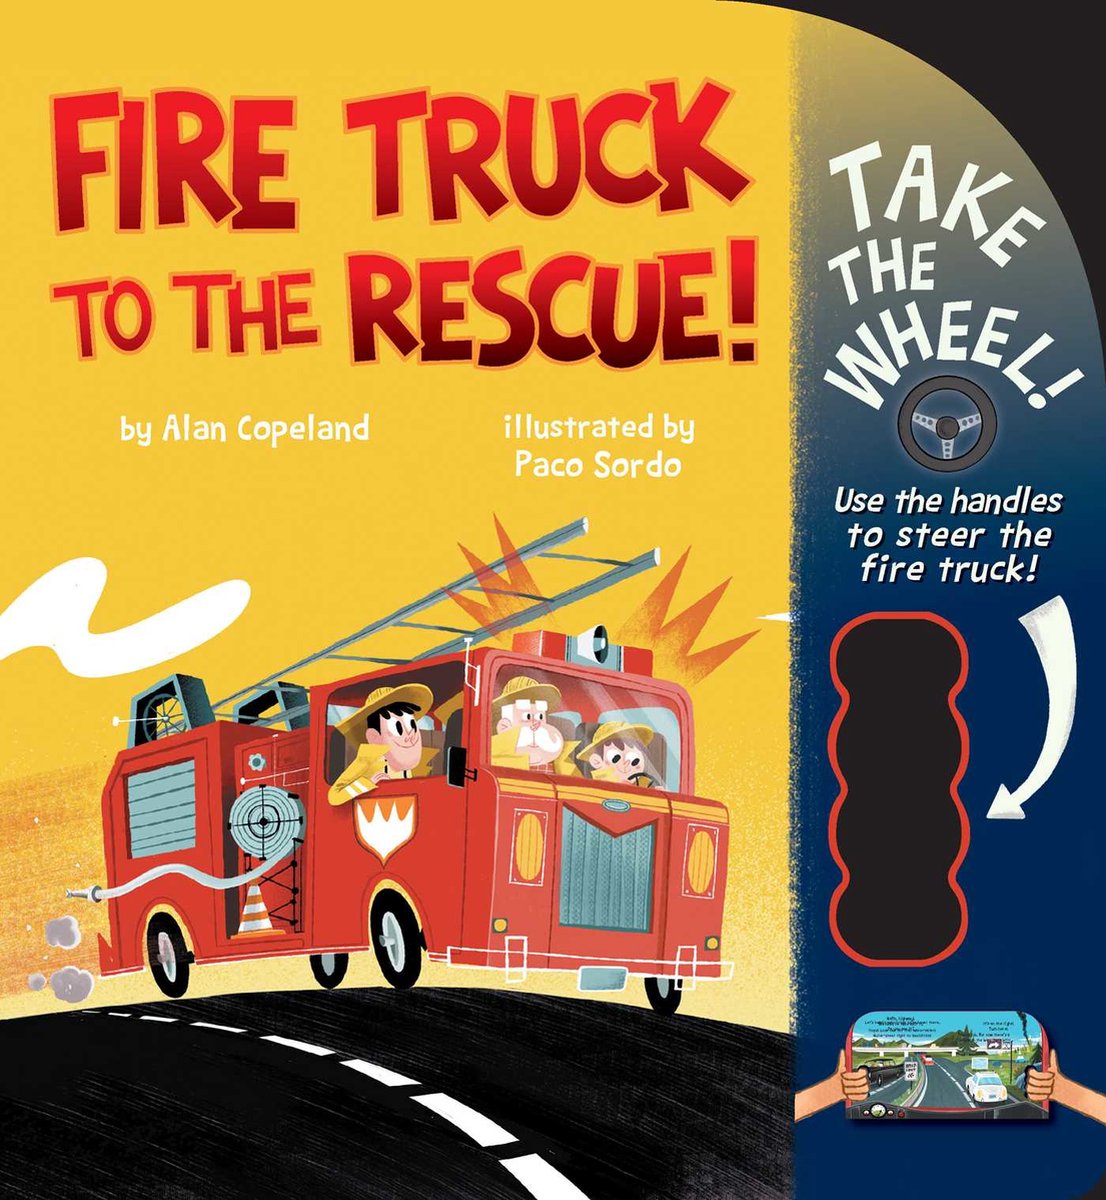 Take the Wheel!- Fire Truck to the Rescue! - Alan Copeland